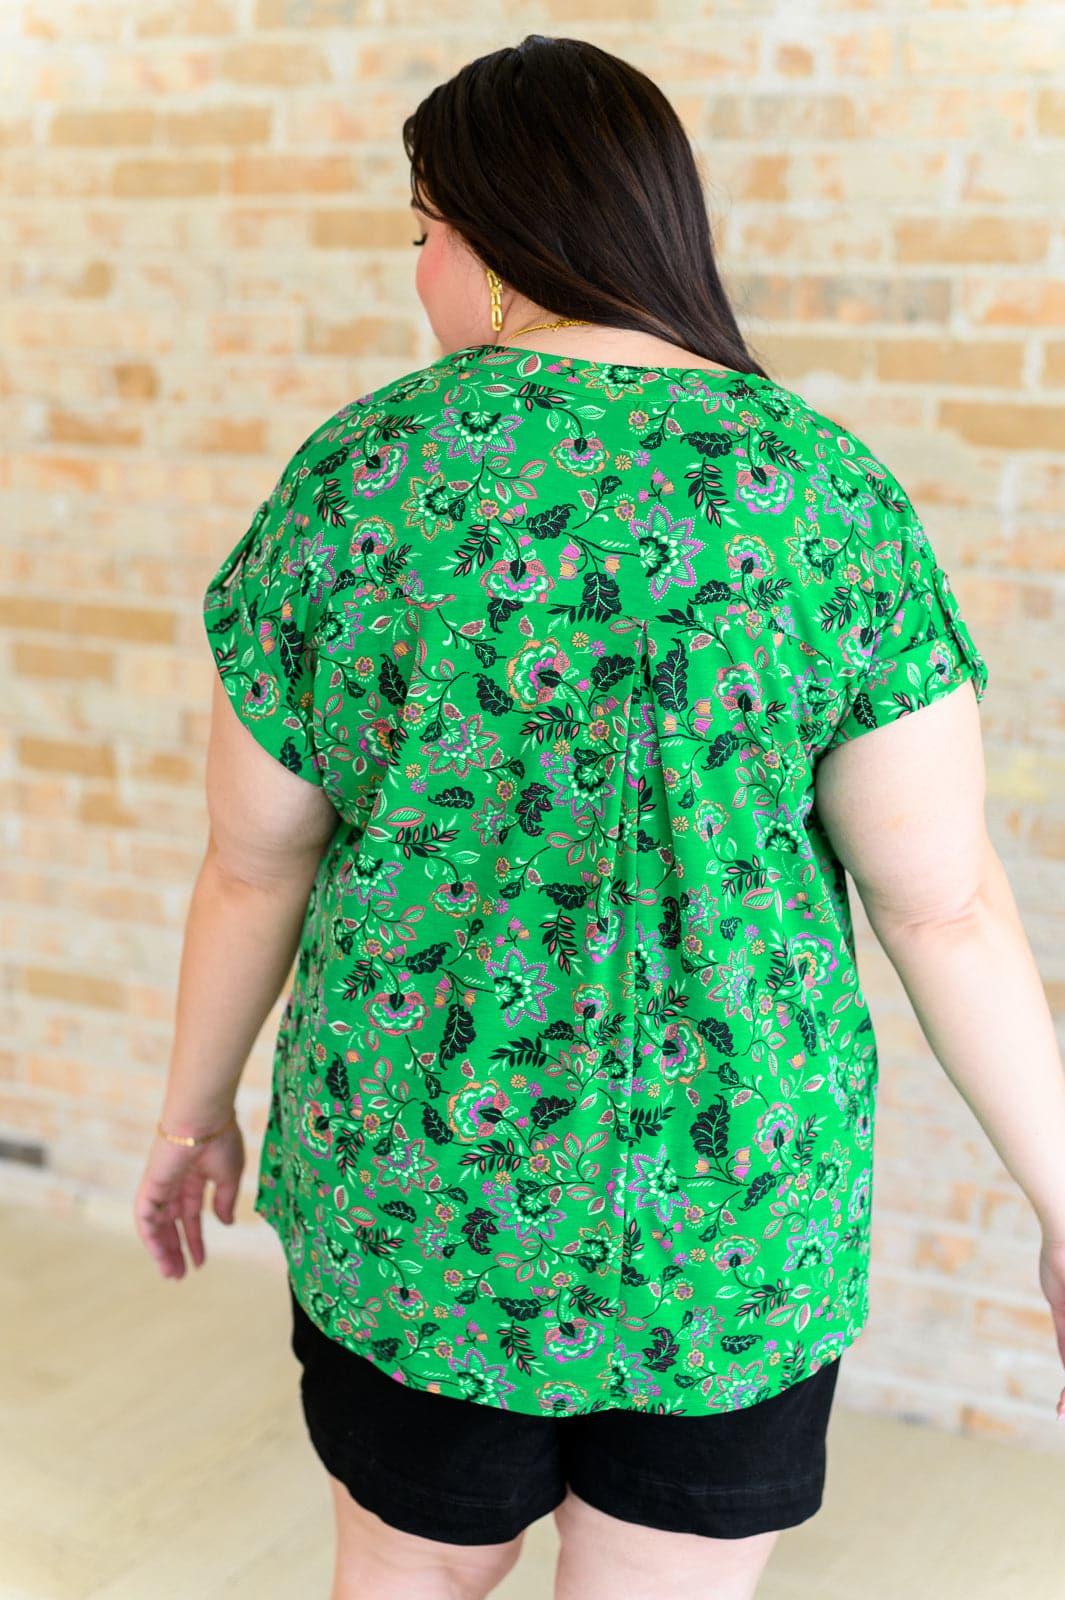 Lizzy Cap Sleeve Top in Green and Black Floral - SwagglyLife Home & Fashion